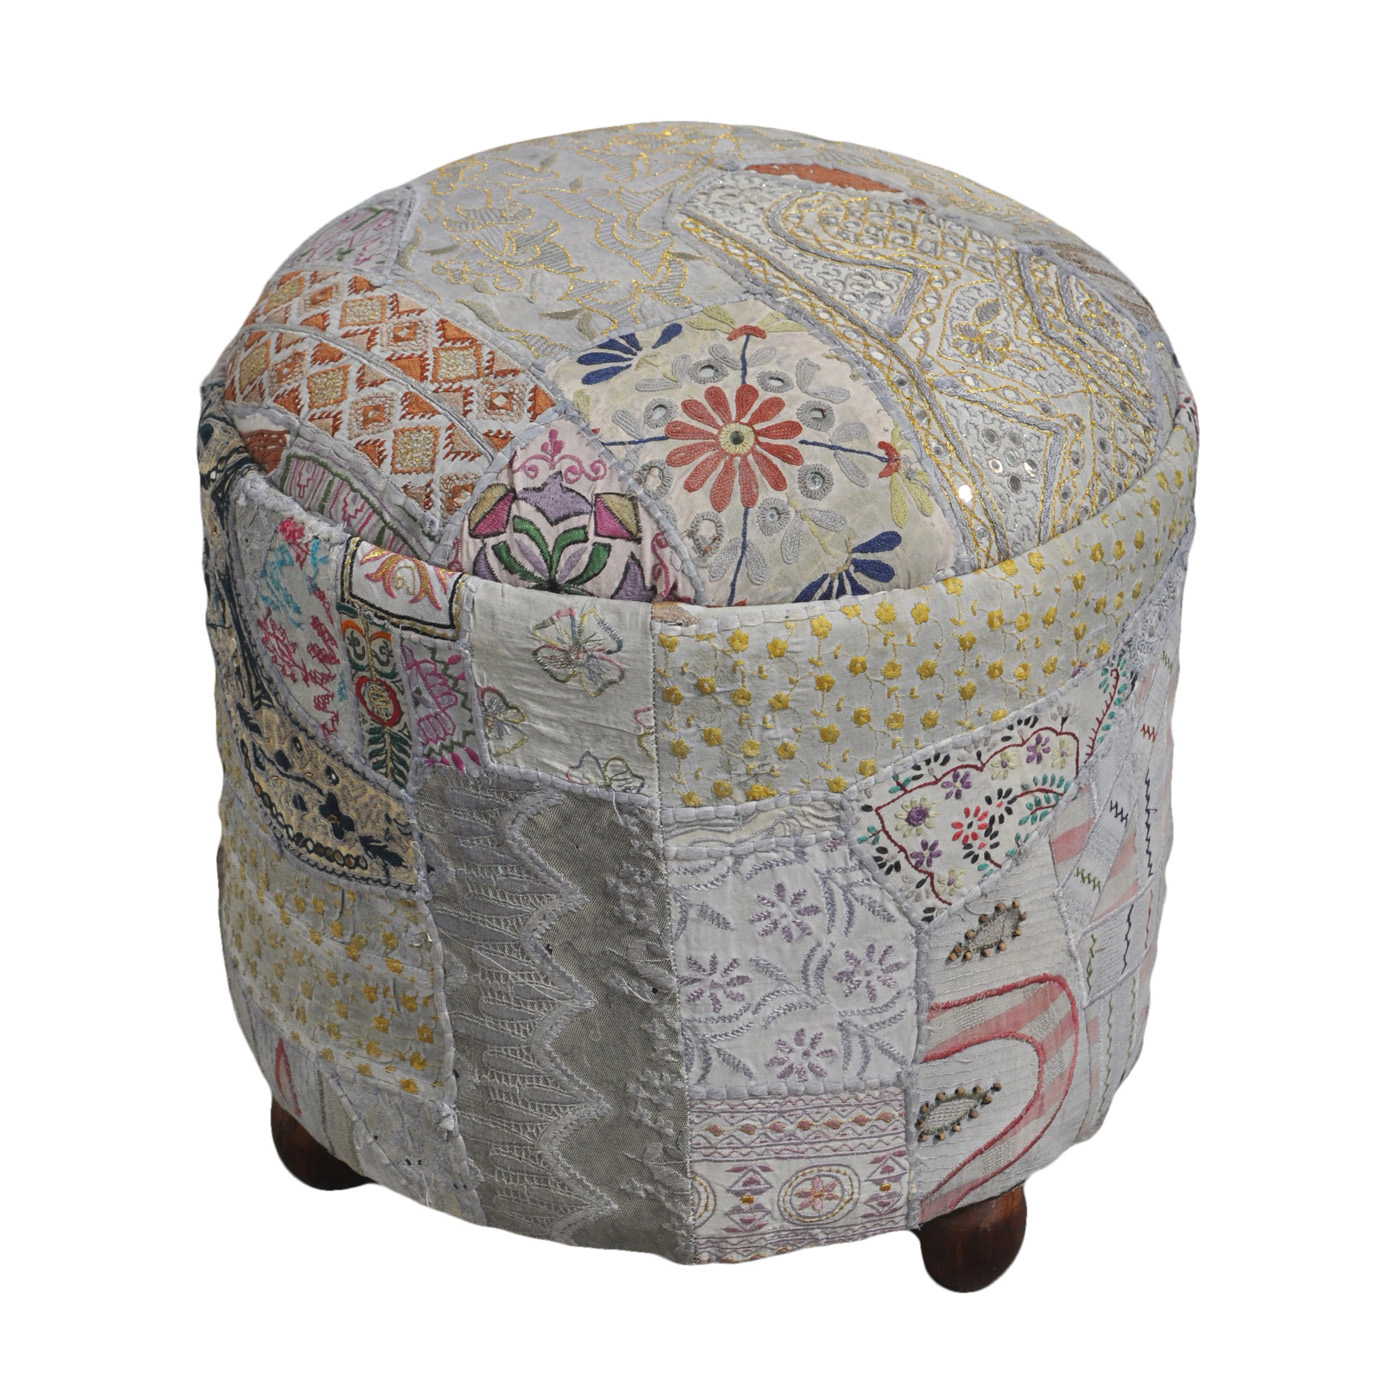 Patchwork Pouf | Colorful Upholstered Patchwork Ottoman | Dallas, TX